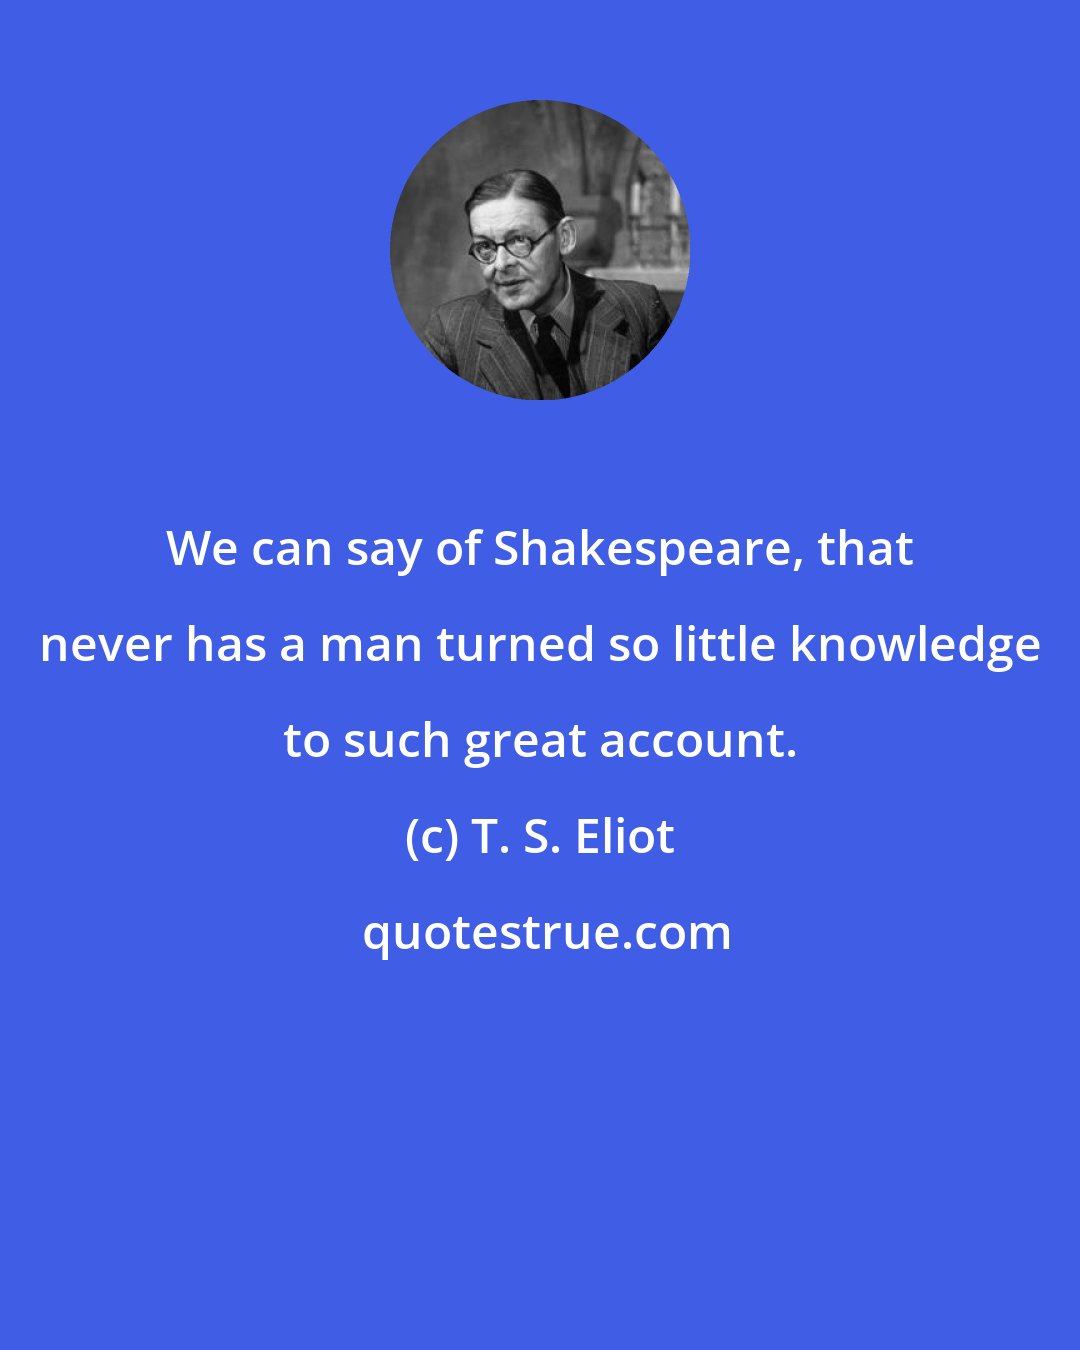 T. S. Eliot: We can say of Shakespeare, that never has a man turned so little knowledge to such great account.